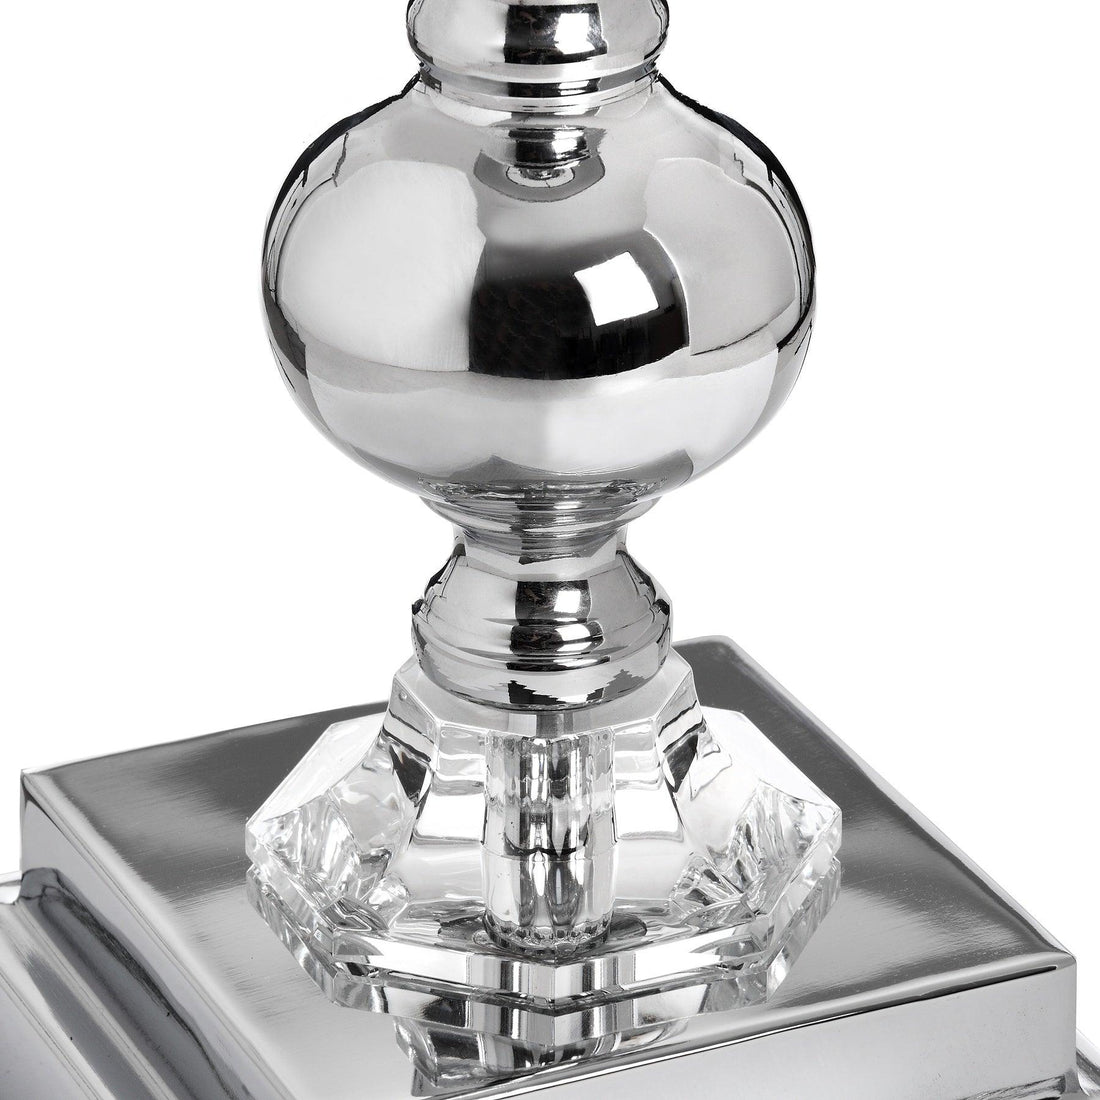 Milan Chrome Table Lamp - £129.95 - Lighting > Table Lamps > Hottest Deals 